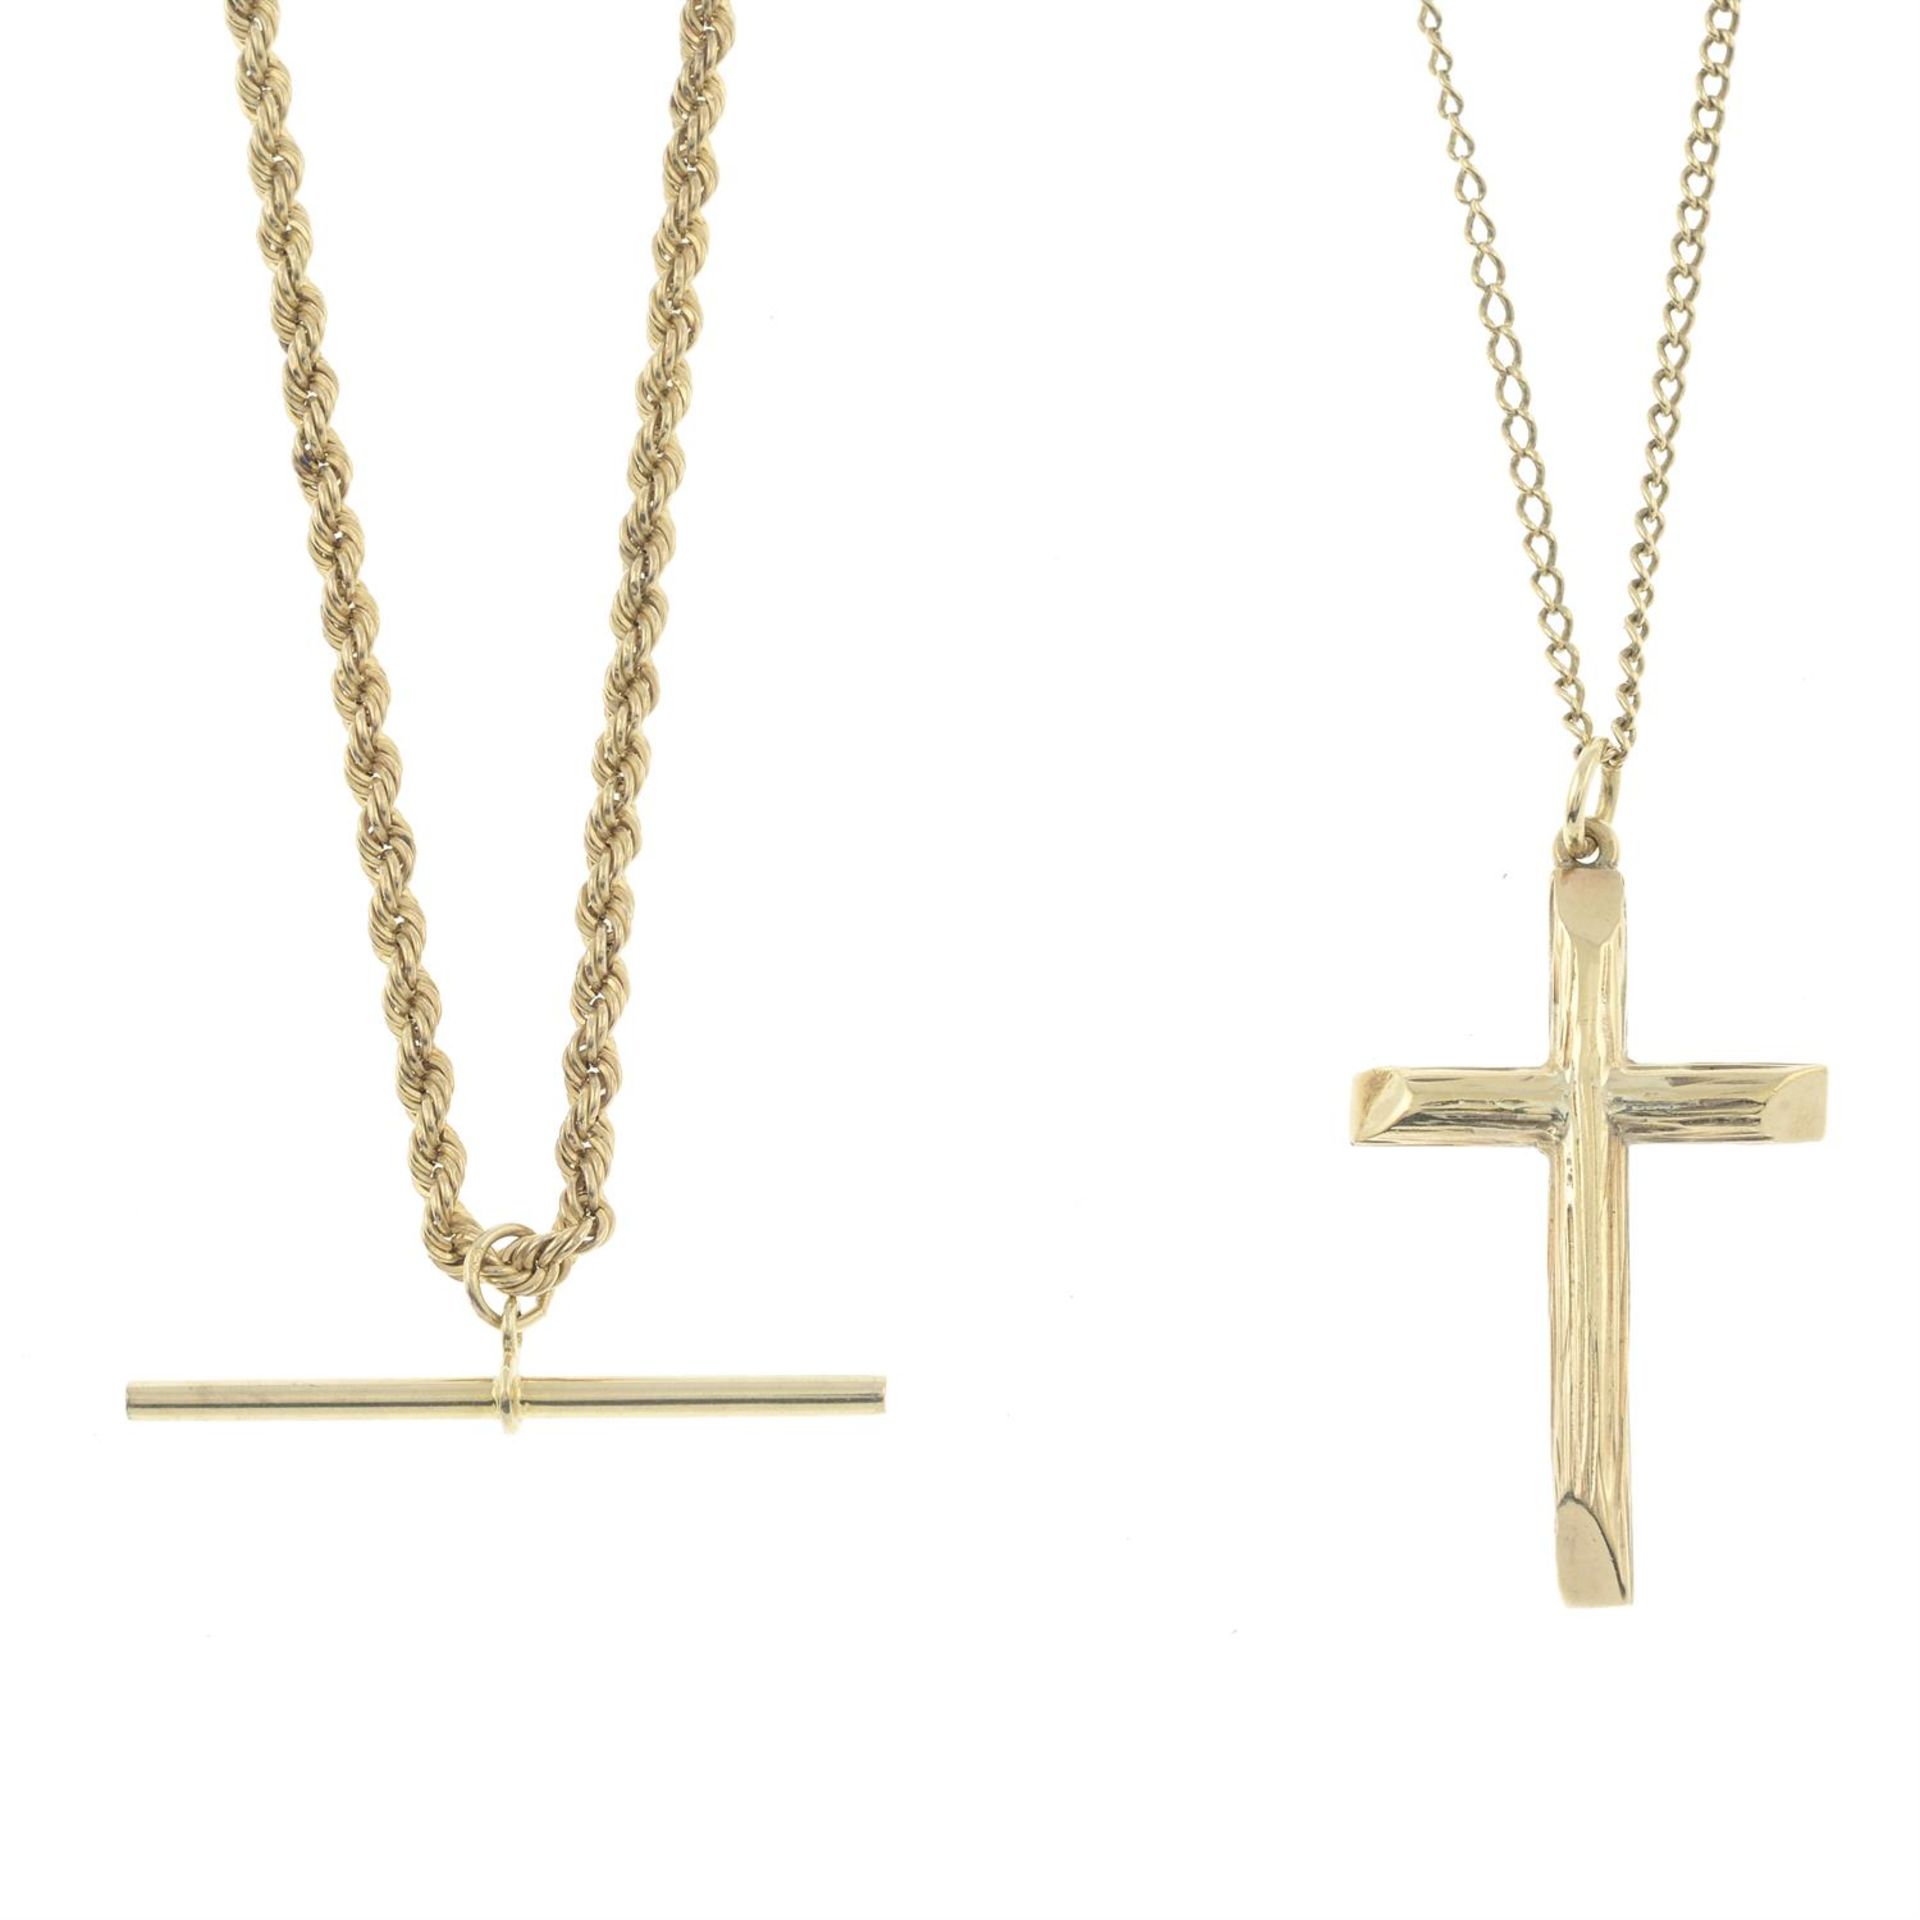 A 9ct gold cross pendant, with chain and a 9ct gold T-bar pendant, with chain.